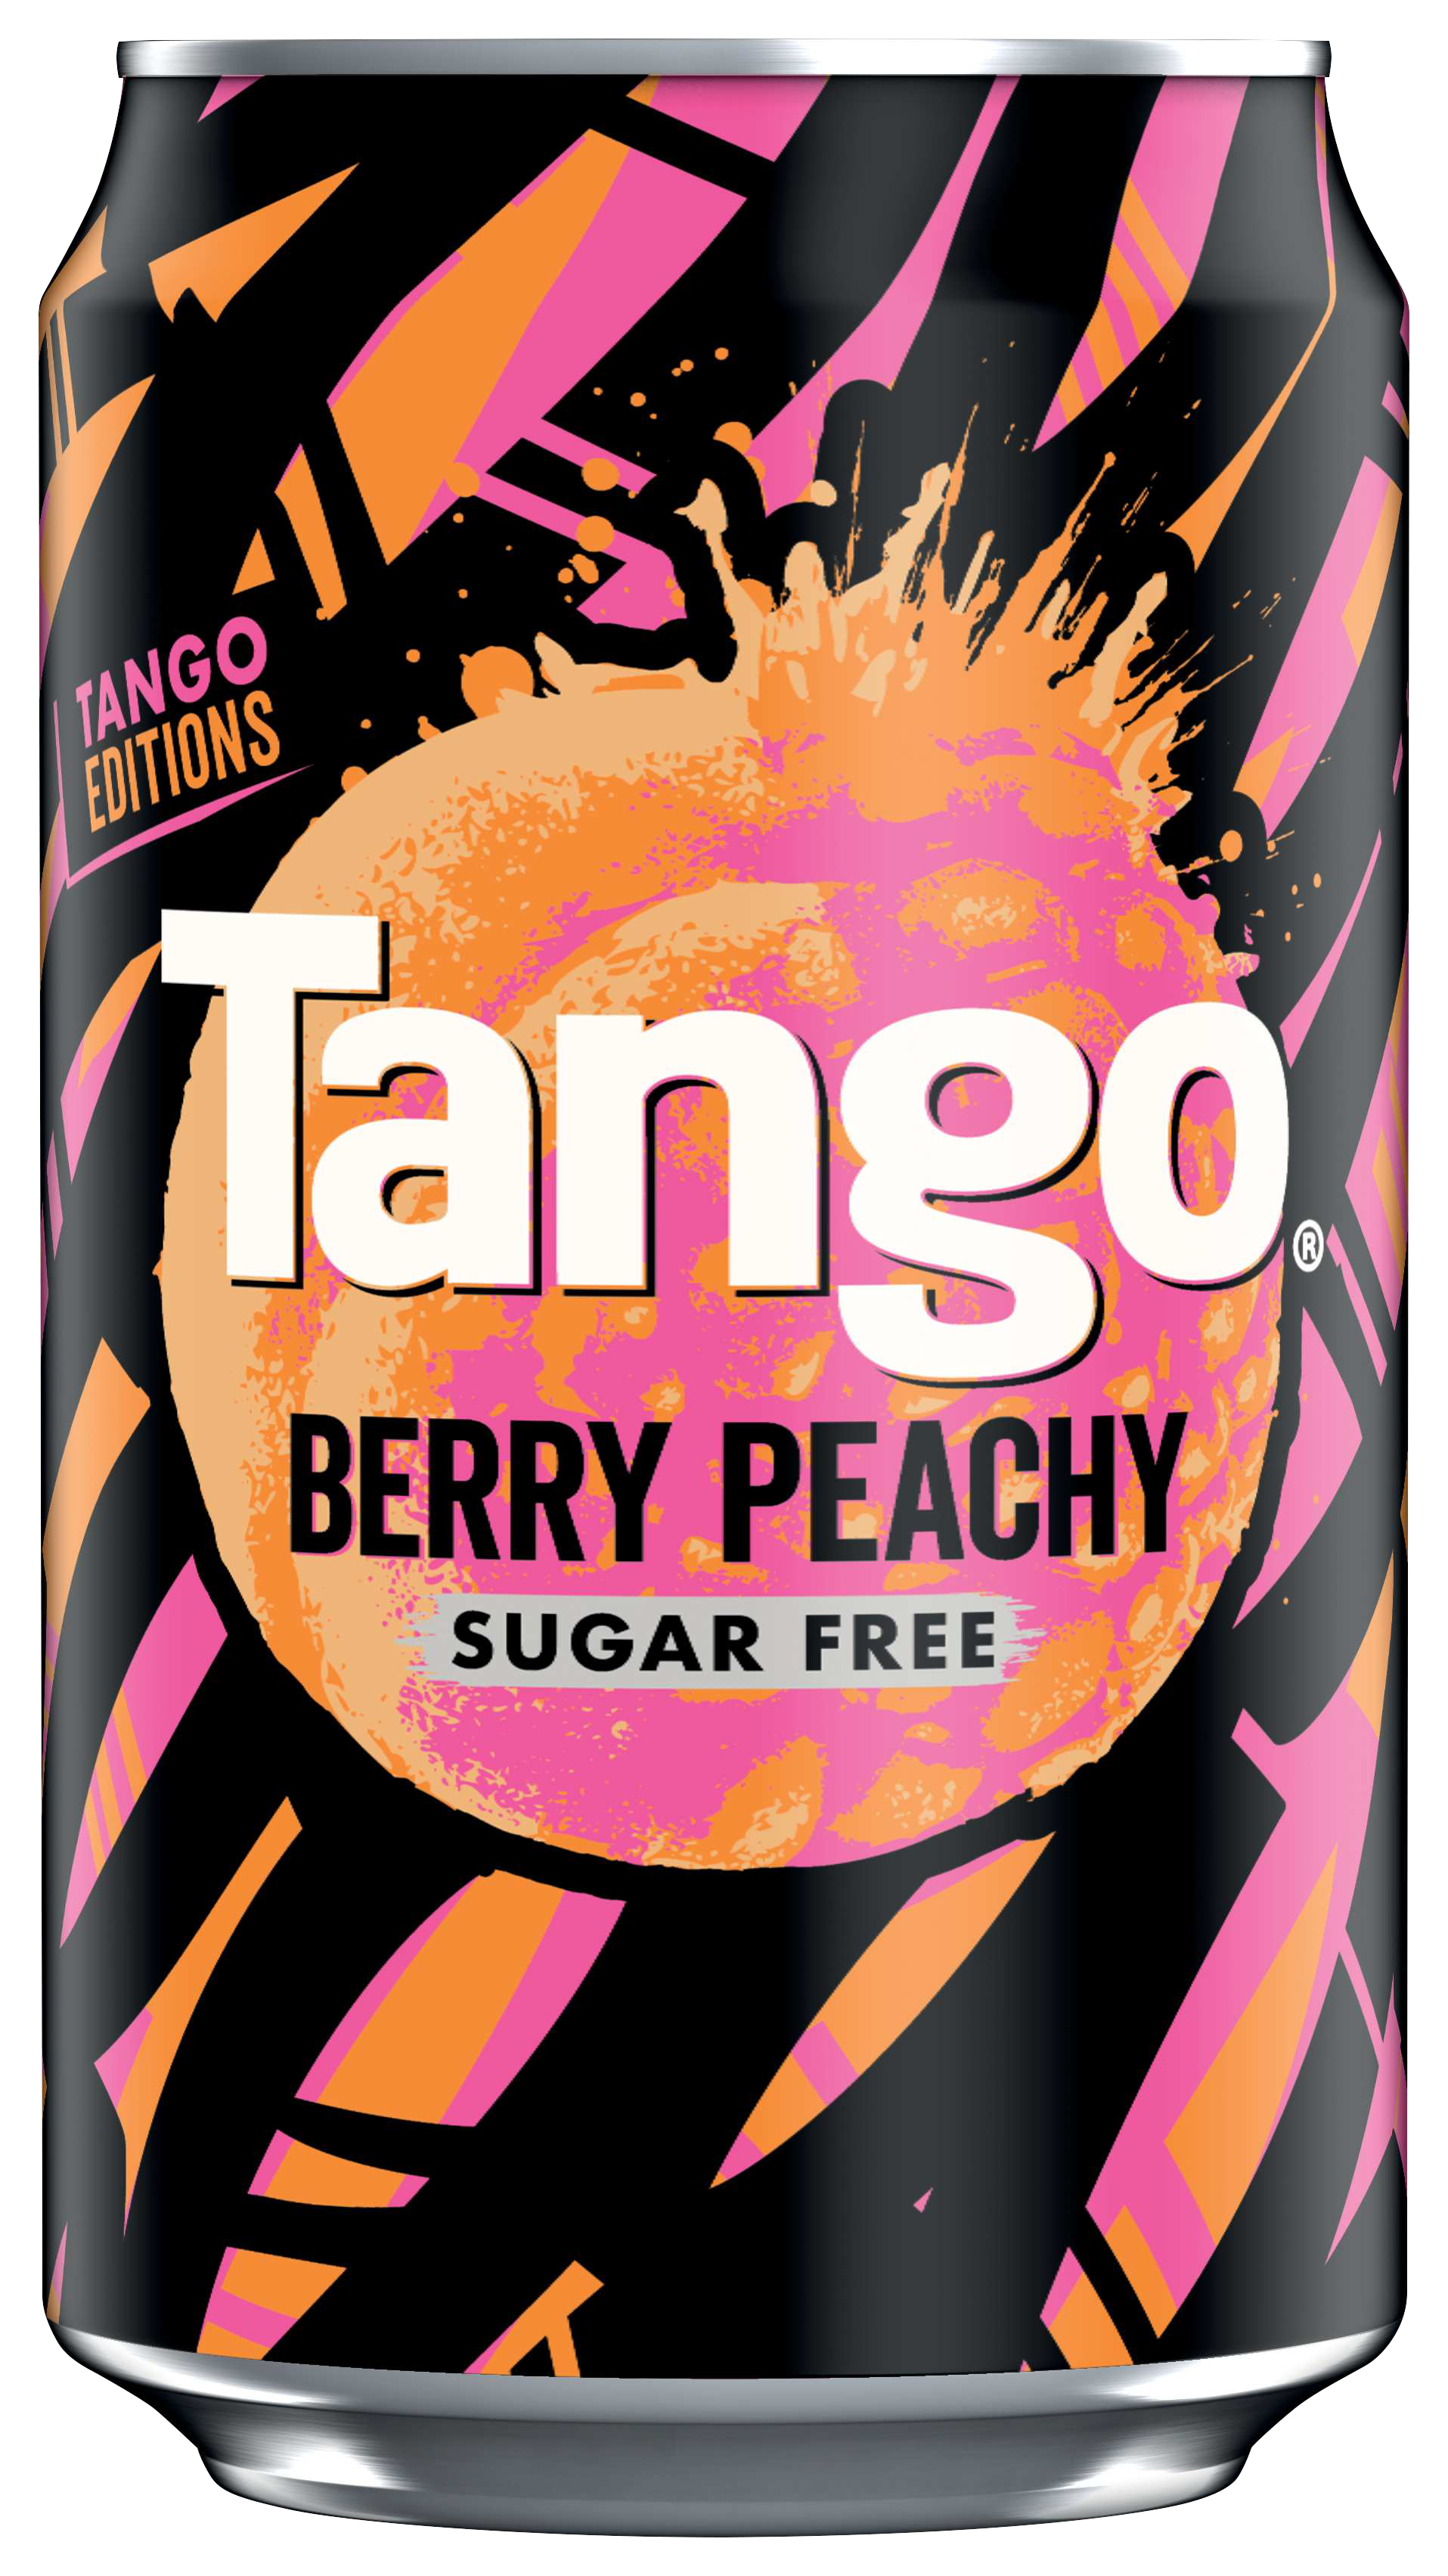 Tango introduces sugar-free Berry Peachy as part of Tango Editions